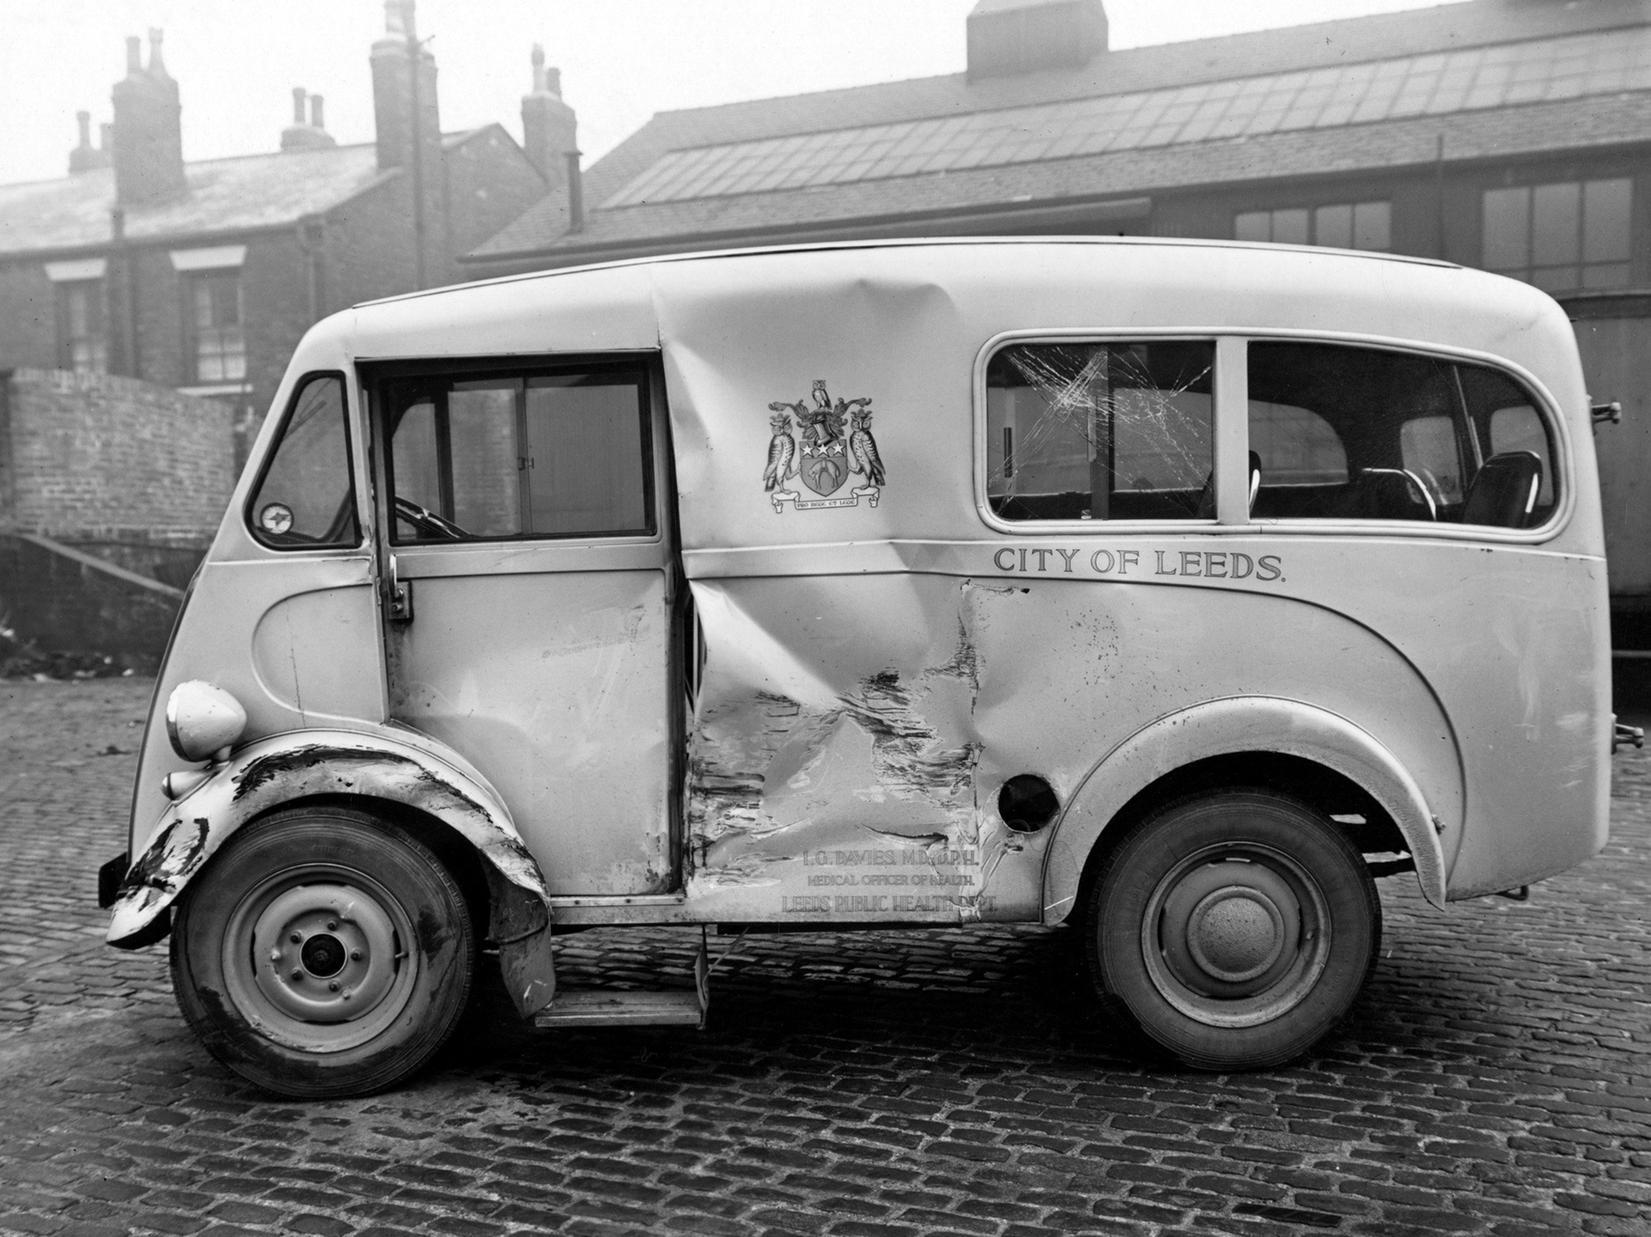 A Leeds Public Health Department ambulance, a Morris van, after an accident, parked in a Leeds City Transport garage on York Road. There is a clear view of the Leeds coat of arms on the bodywork.